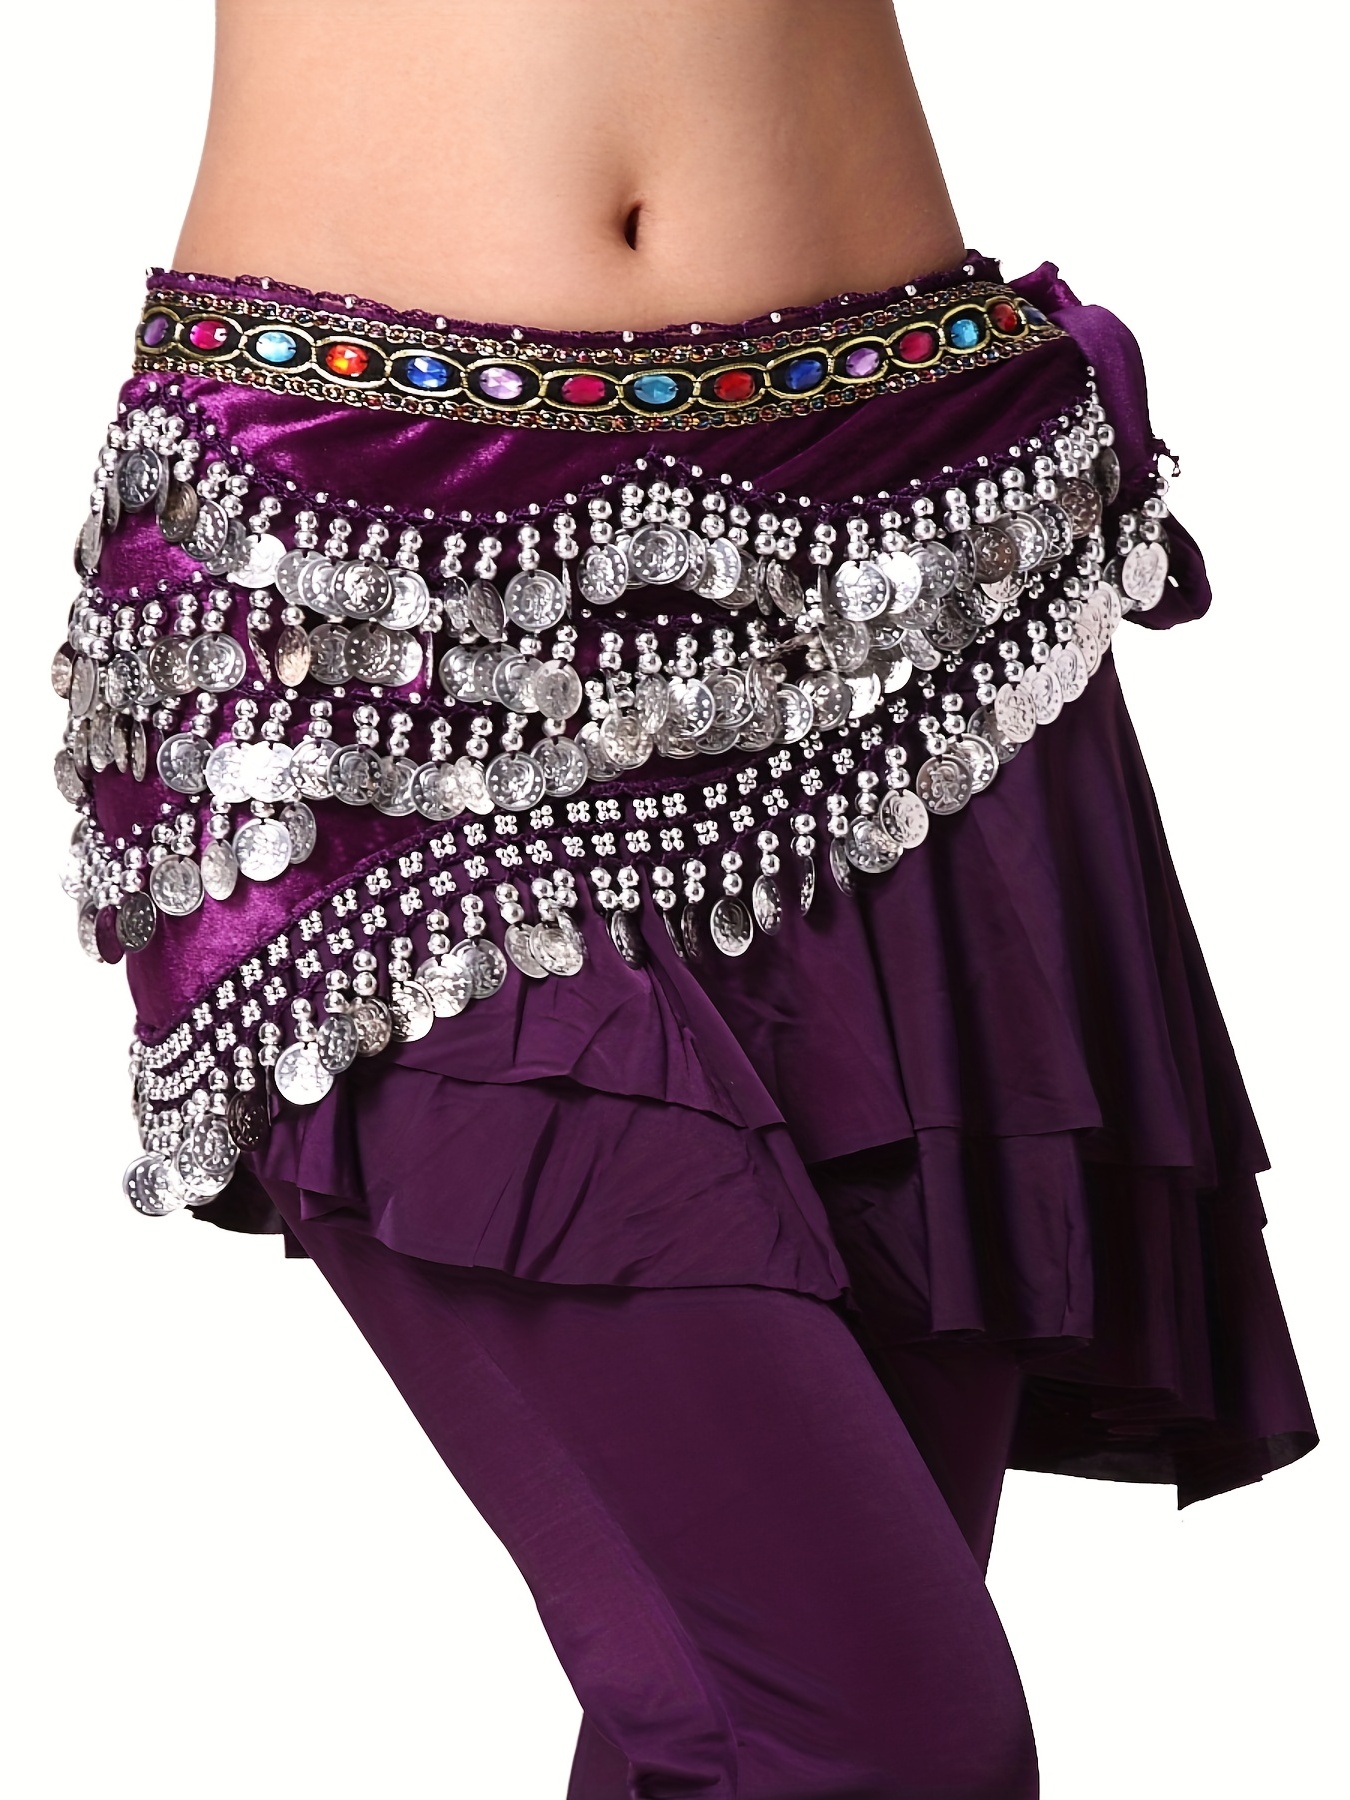 Belly Dance Coin Top in Black Crocheted Design